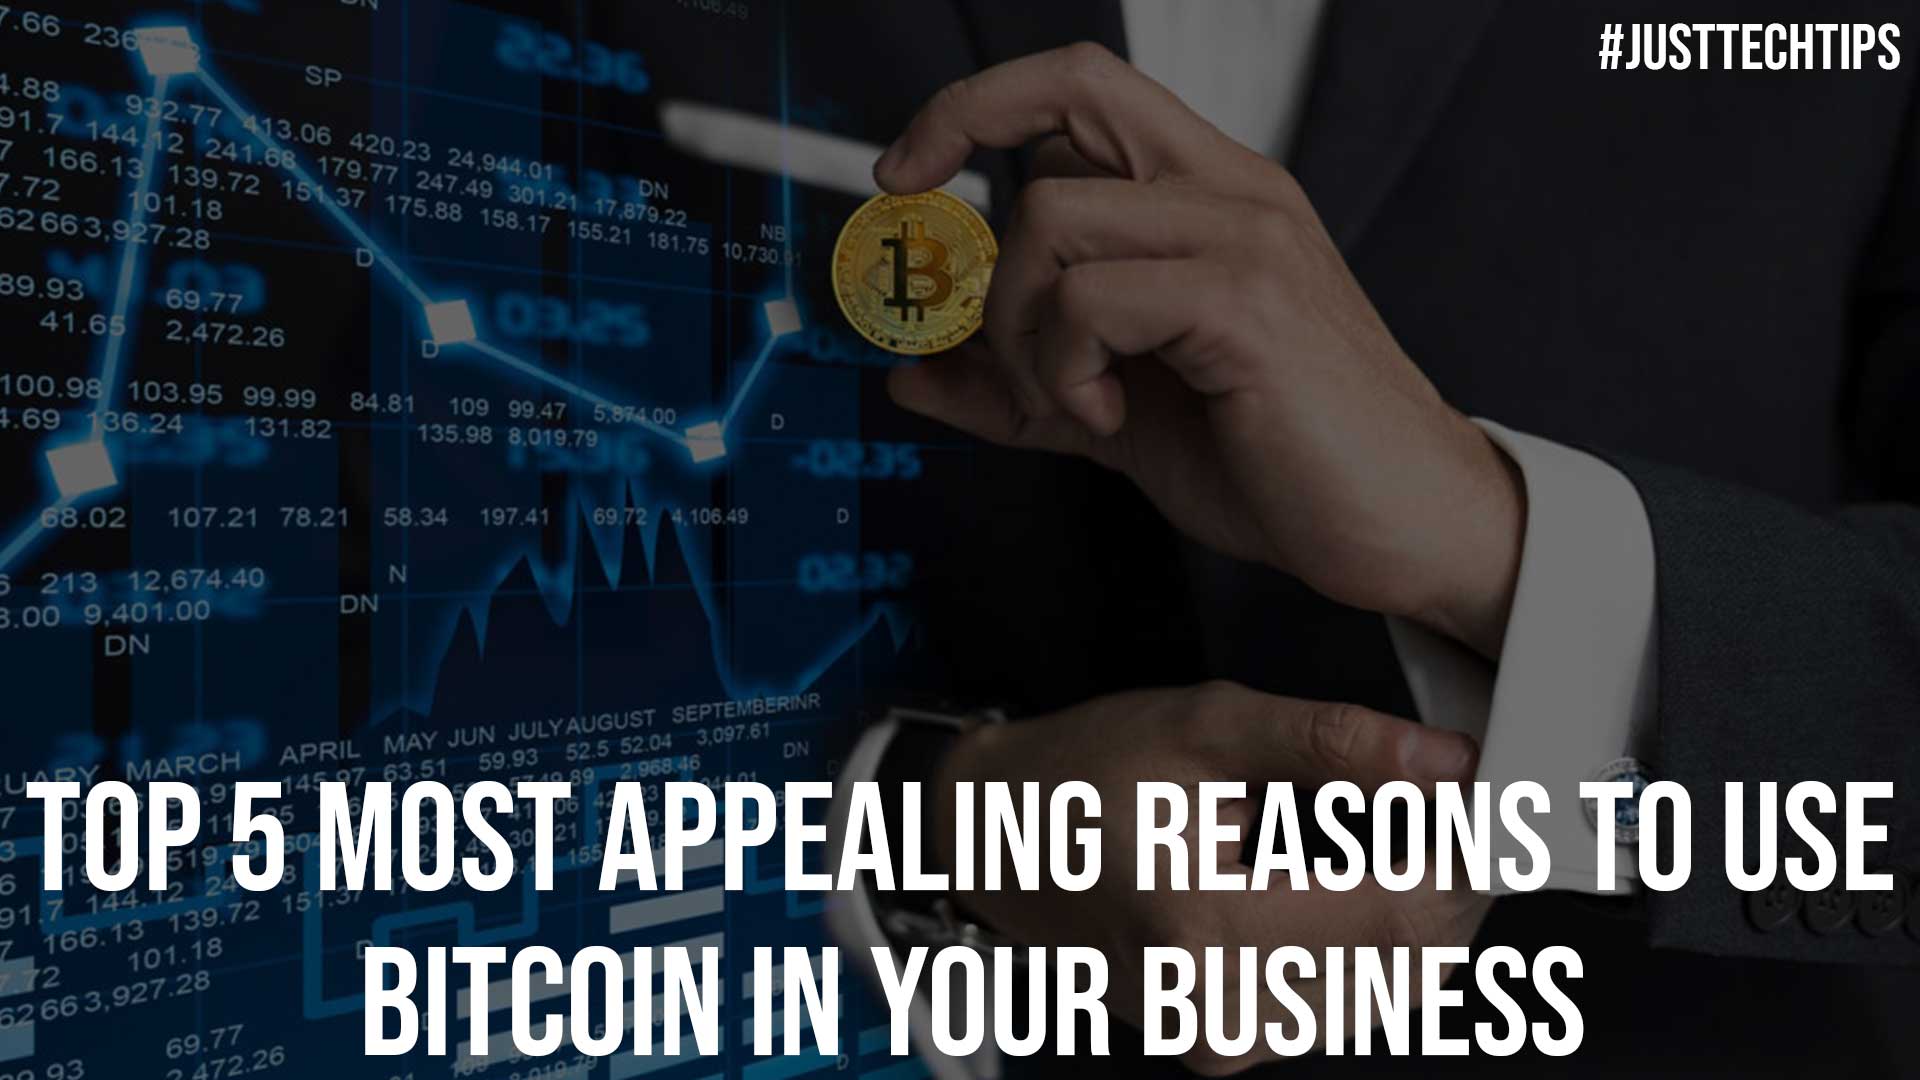 Top 5 Most Appealing Reasons to Use Bitcoin in Your Business